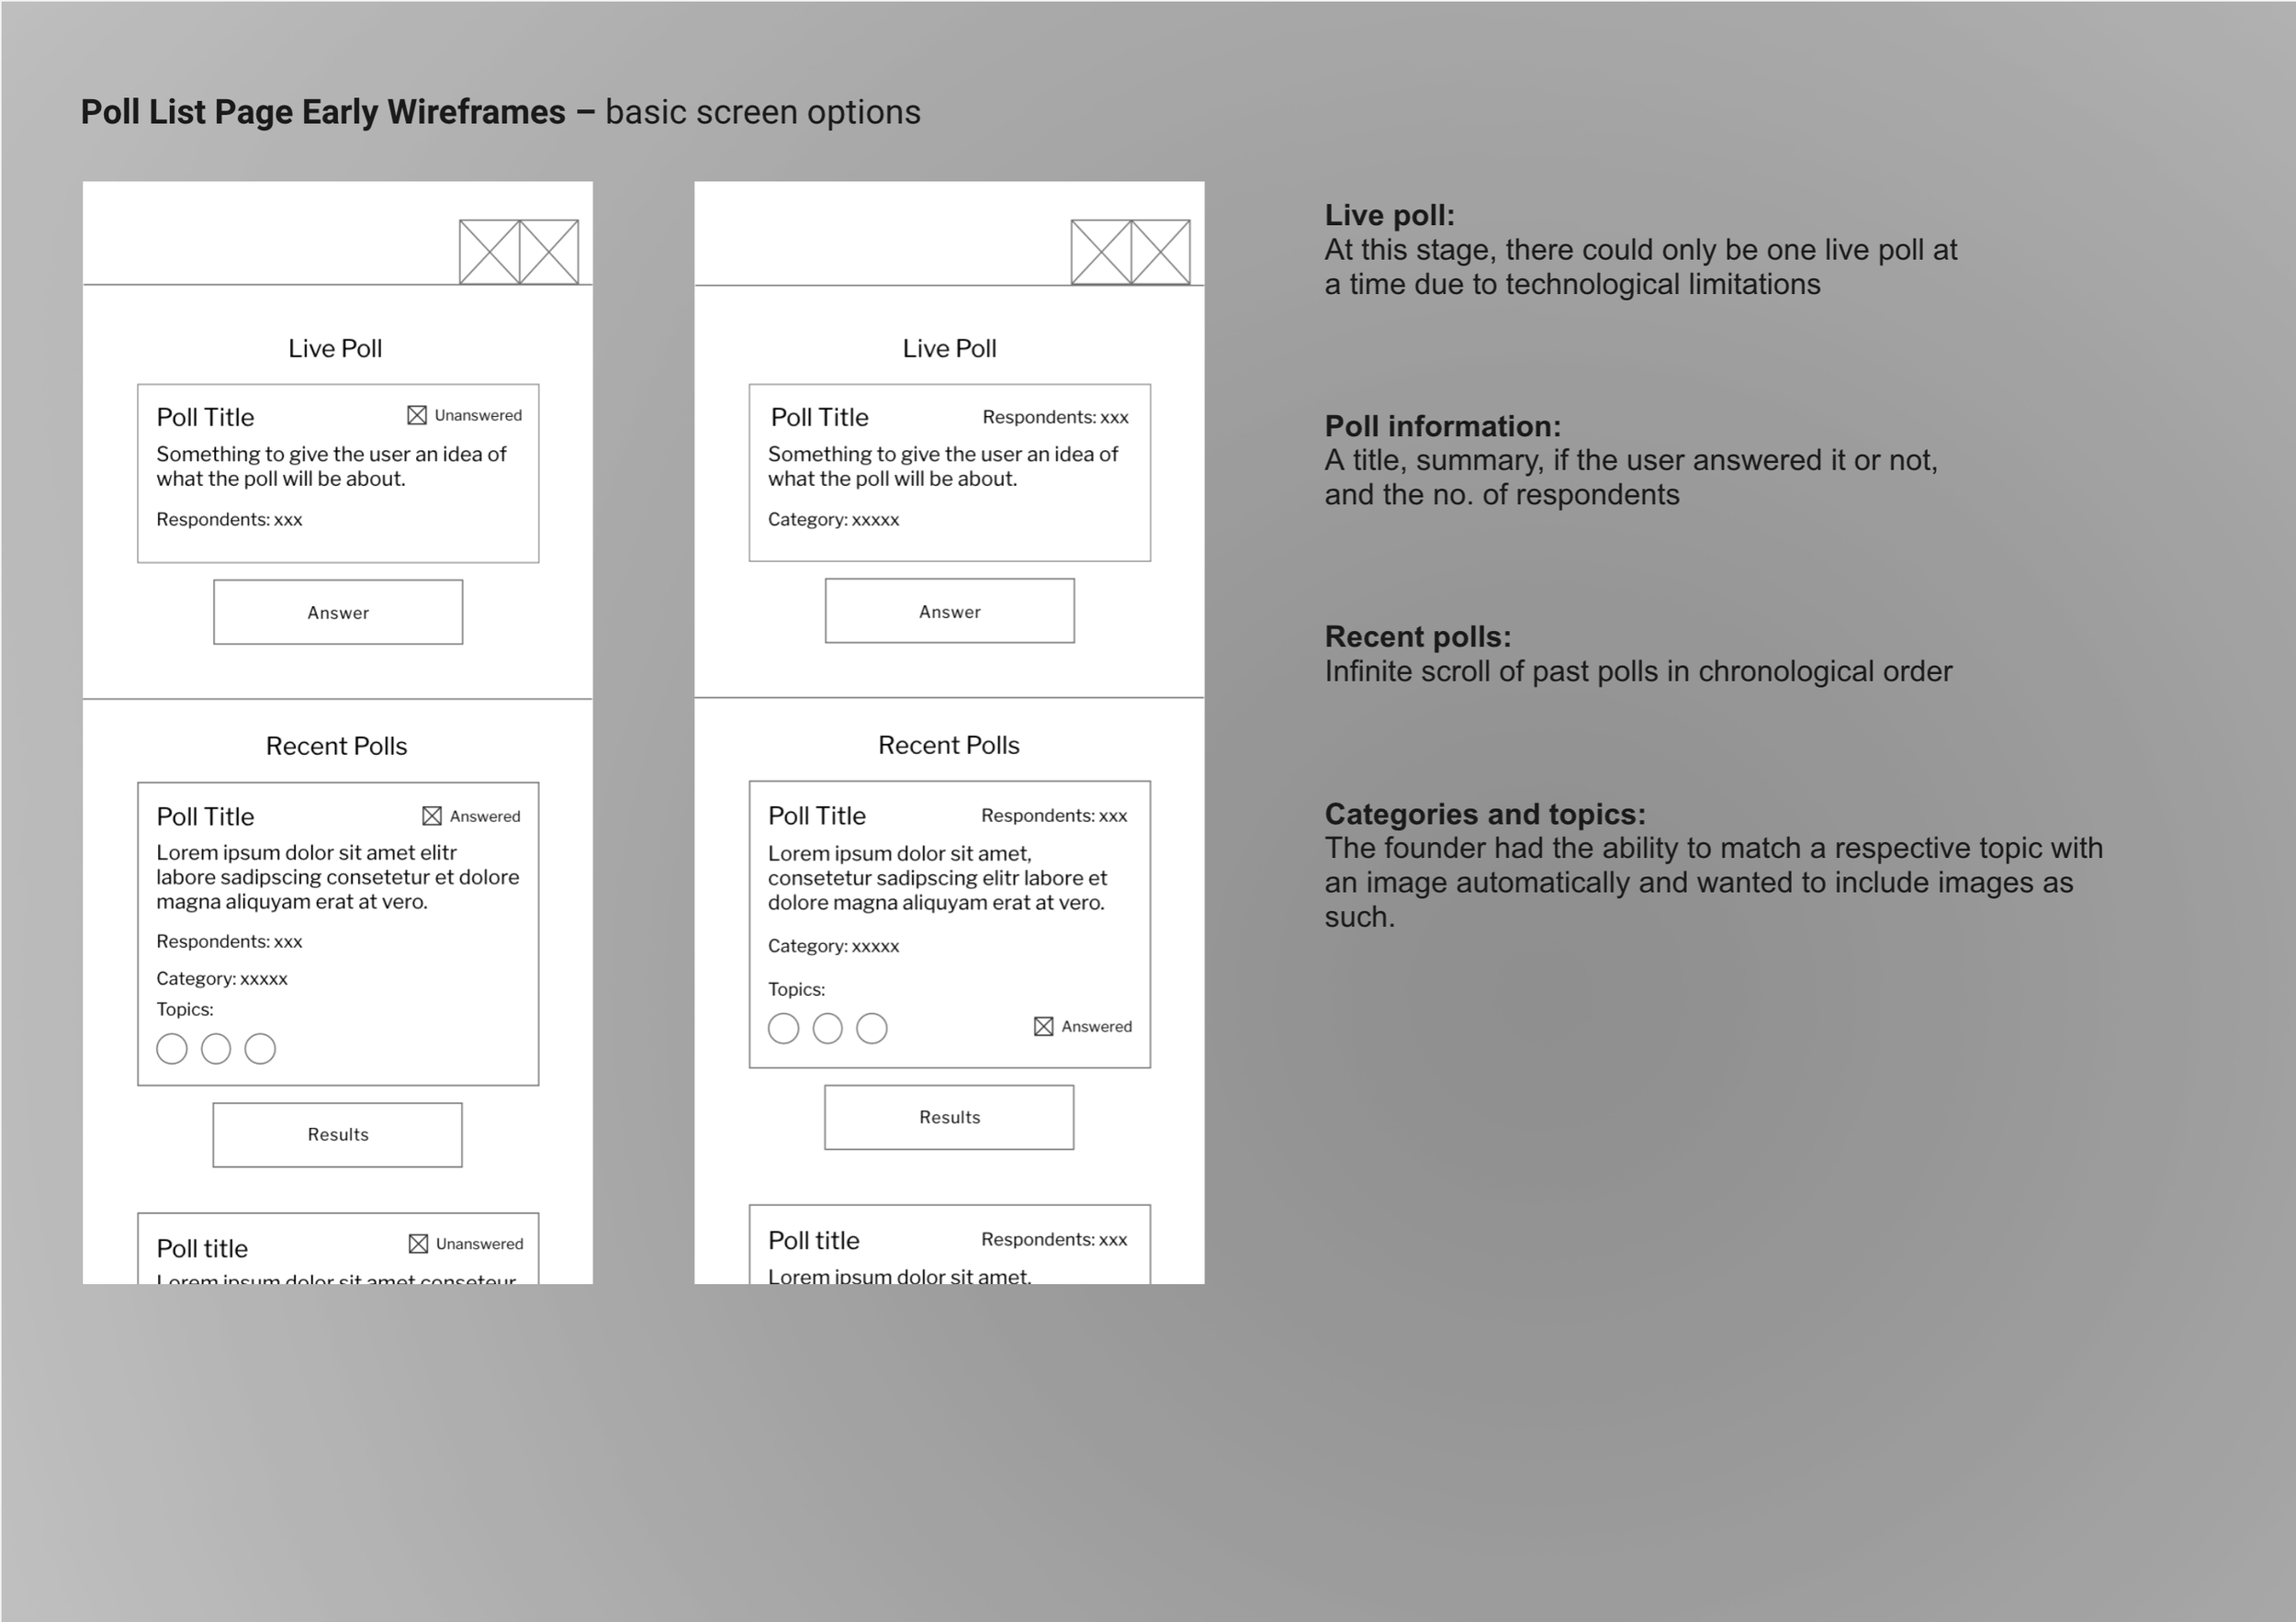 poll-list-page-basic-wireframes.png